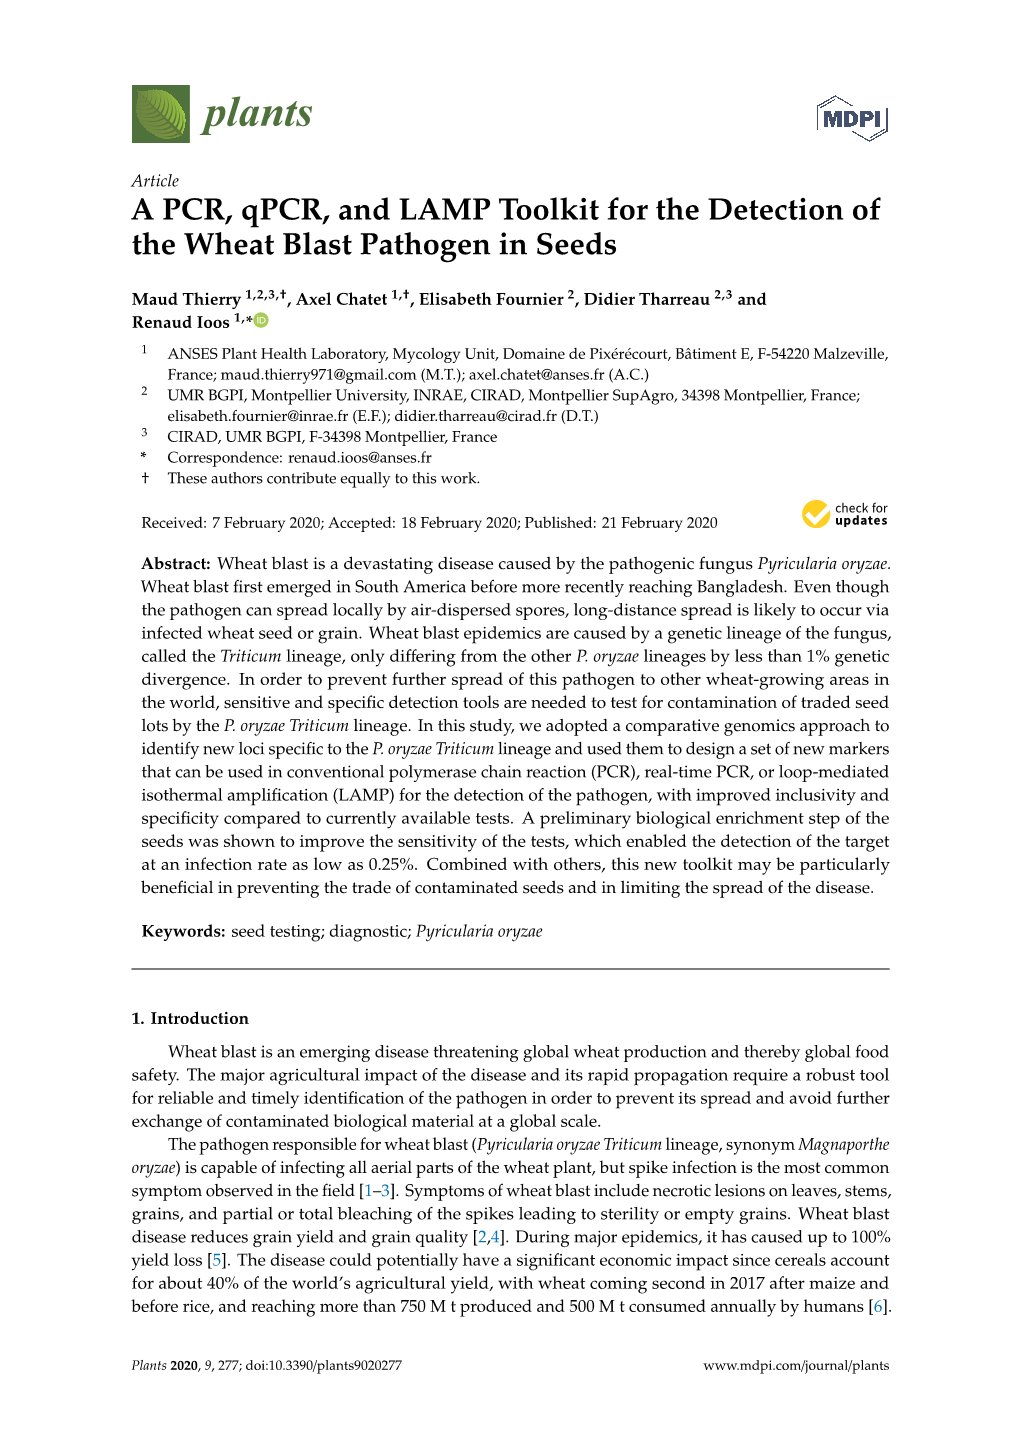 A PCR, Qpcr, and LAMP Toolkit for the Detection of the Wheat Blast Pathogen in Seeds